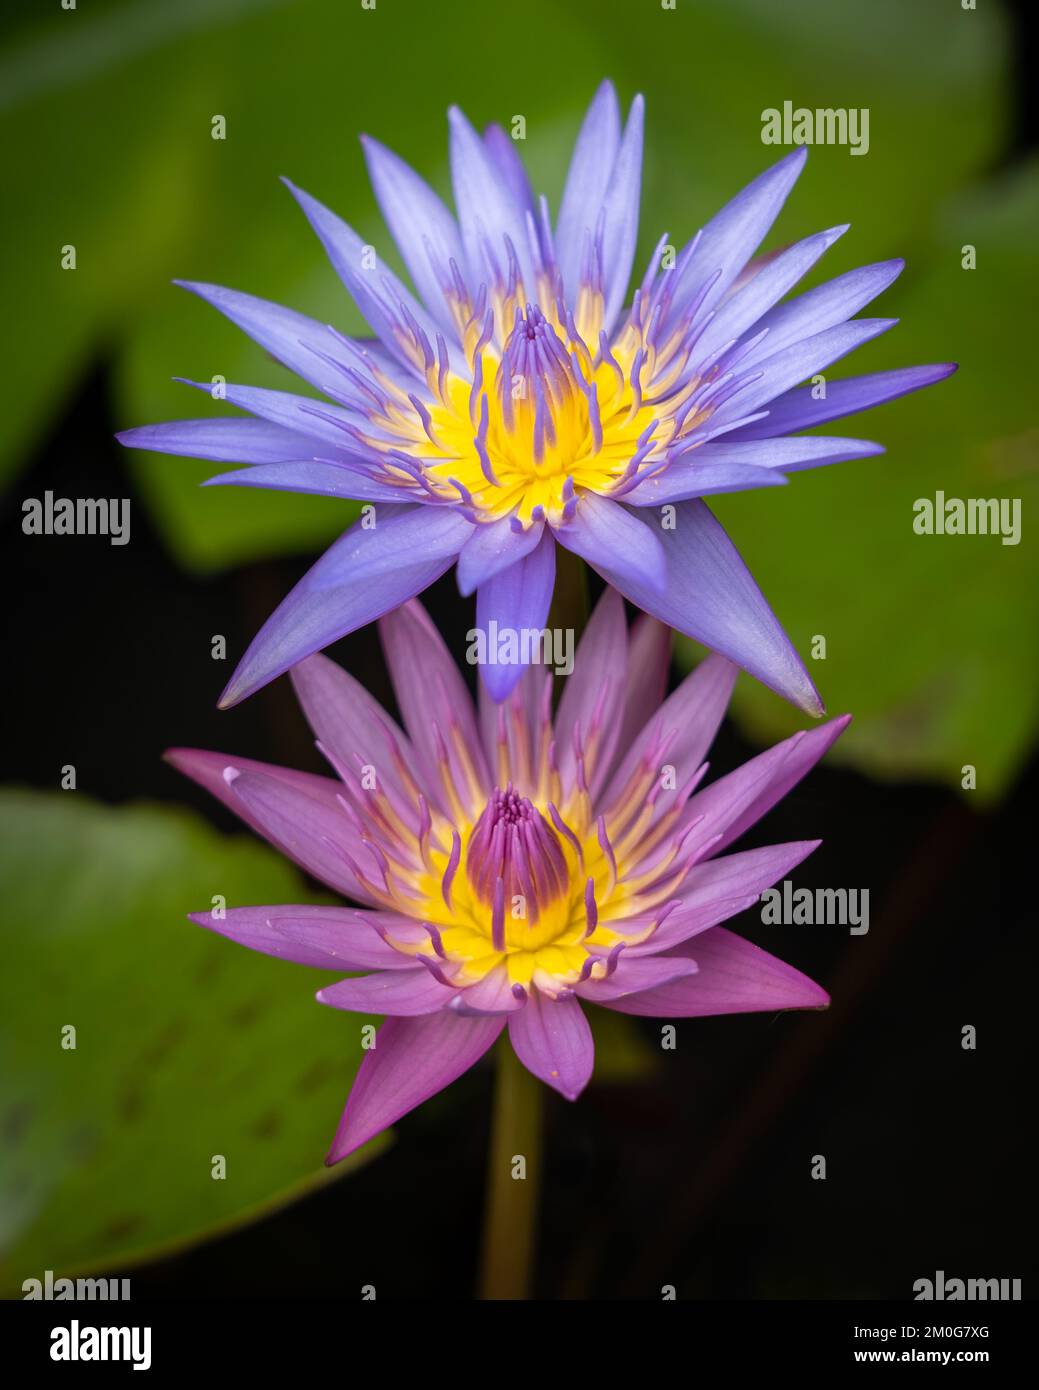 Closeup view of bright pink and purple blue tropical water lily flowers blooming on natural background Stock Photo